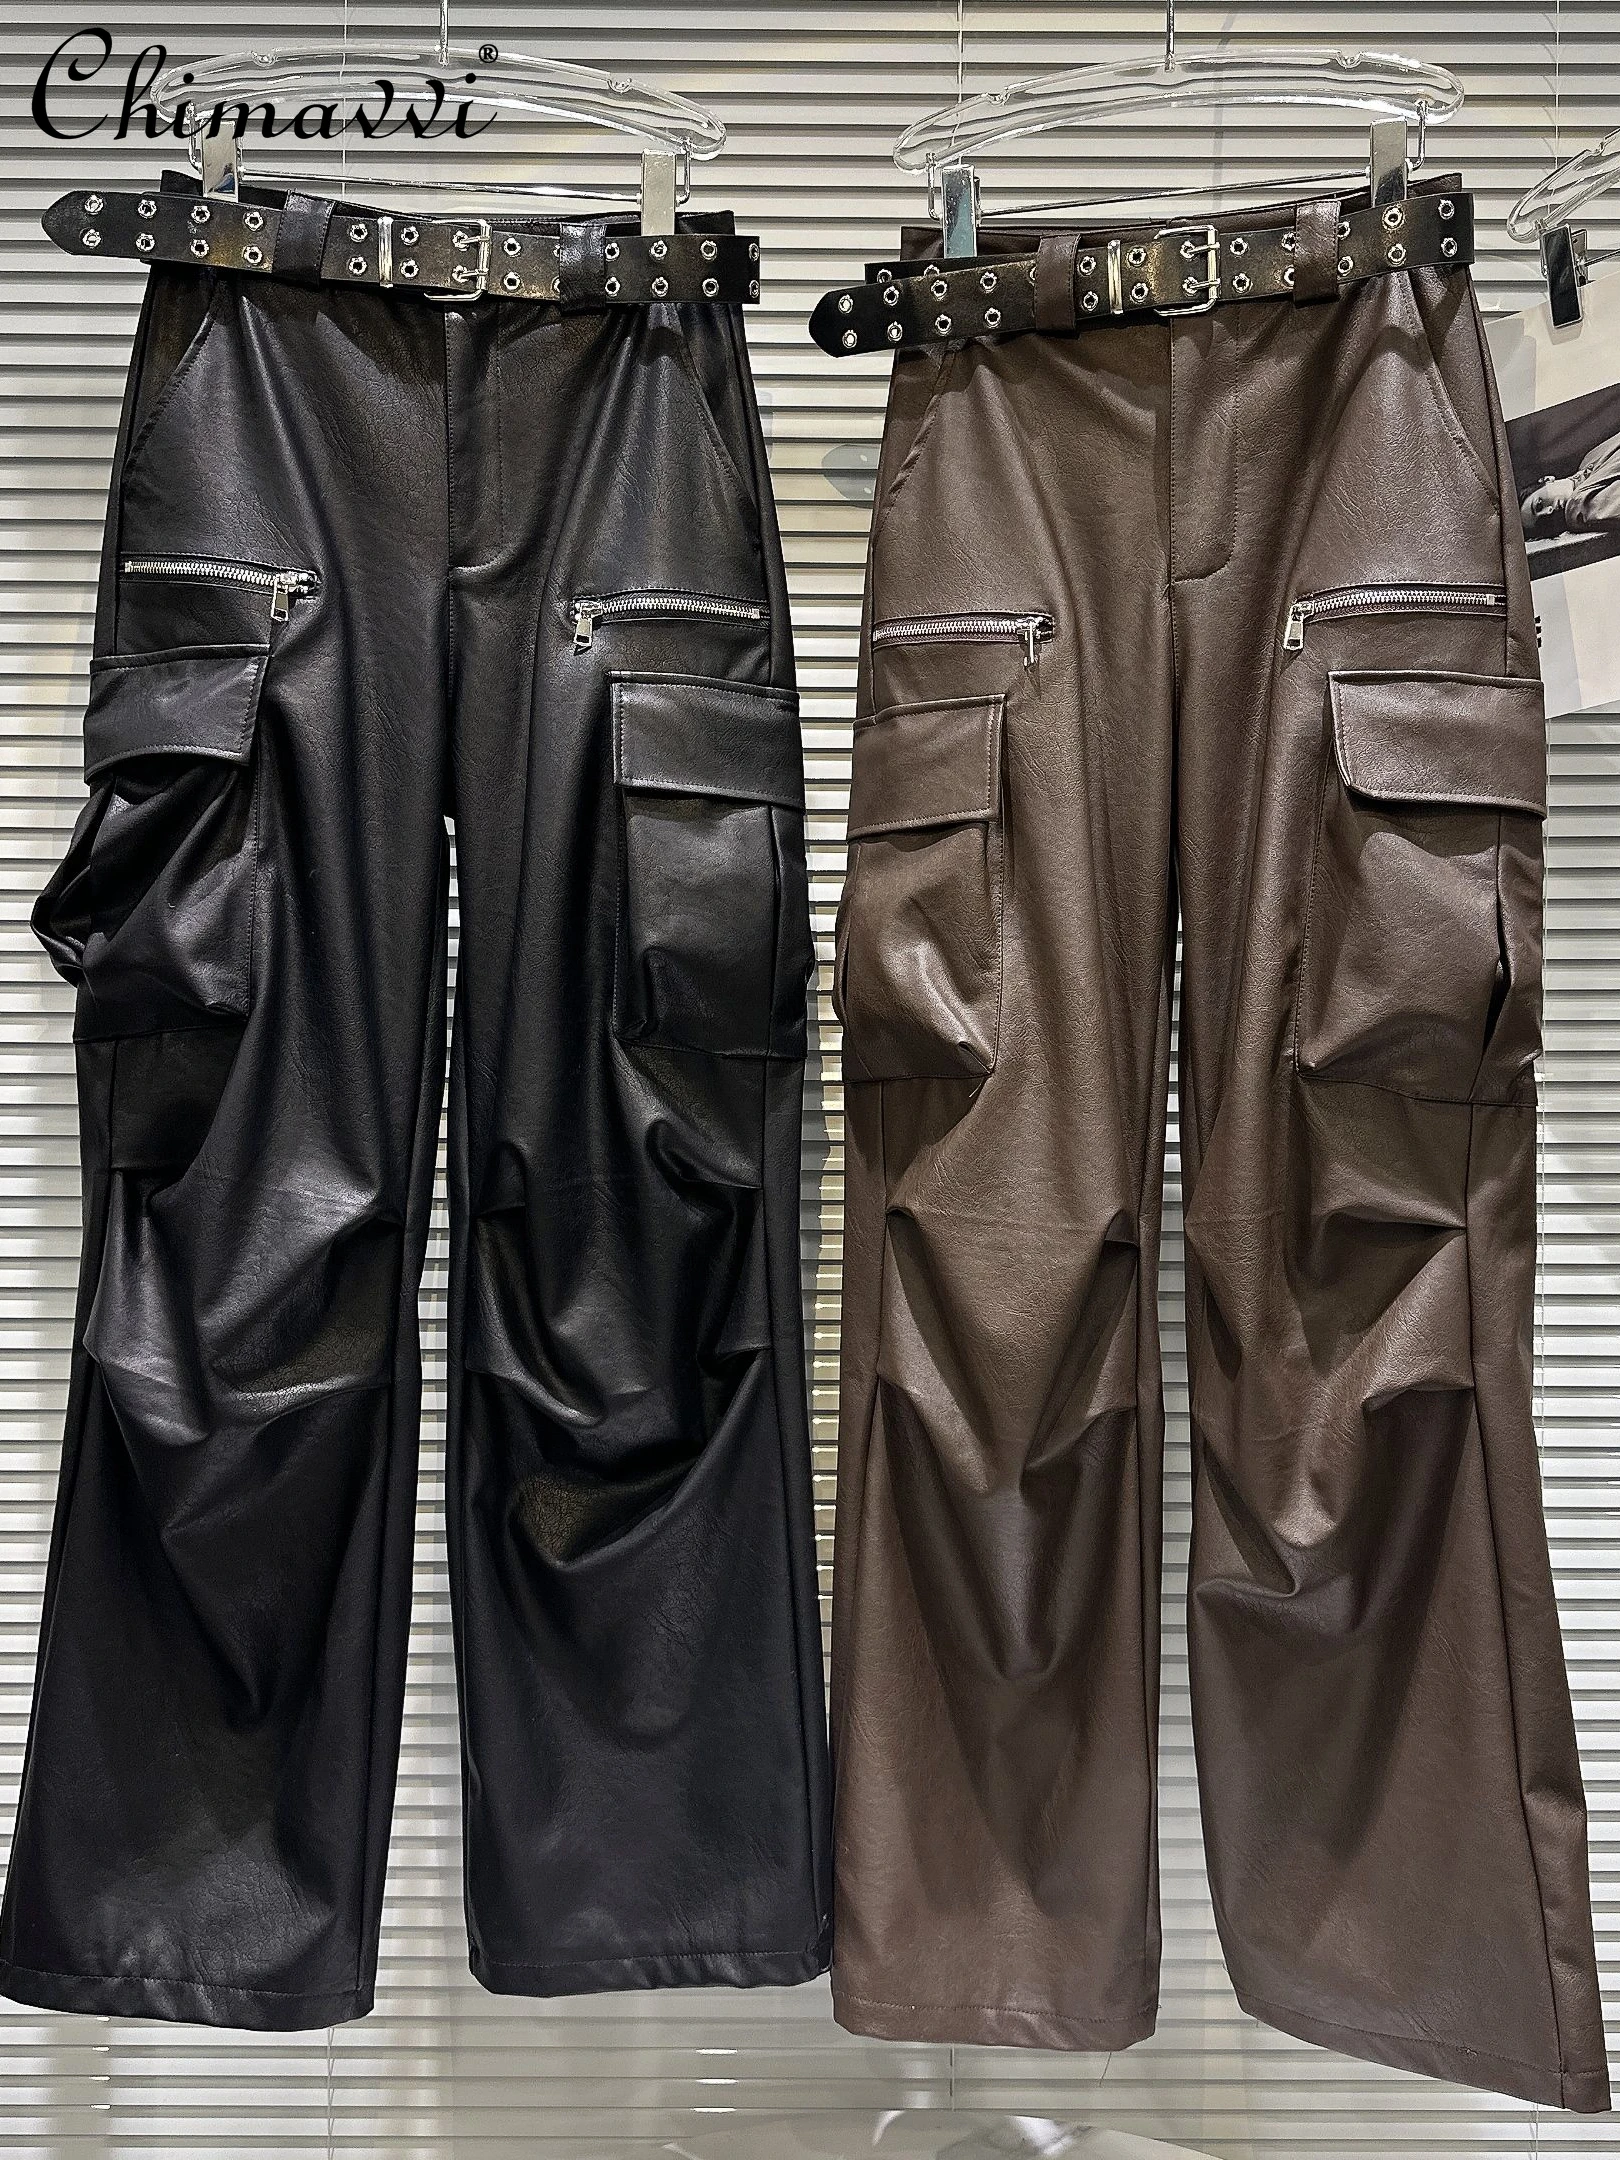 

Women's Trousers 2023 Autumn Clothes New Fashion Rivet Belt Side Pocket PU Leather Hot Girl Overalls Streetwear Leather Pants